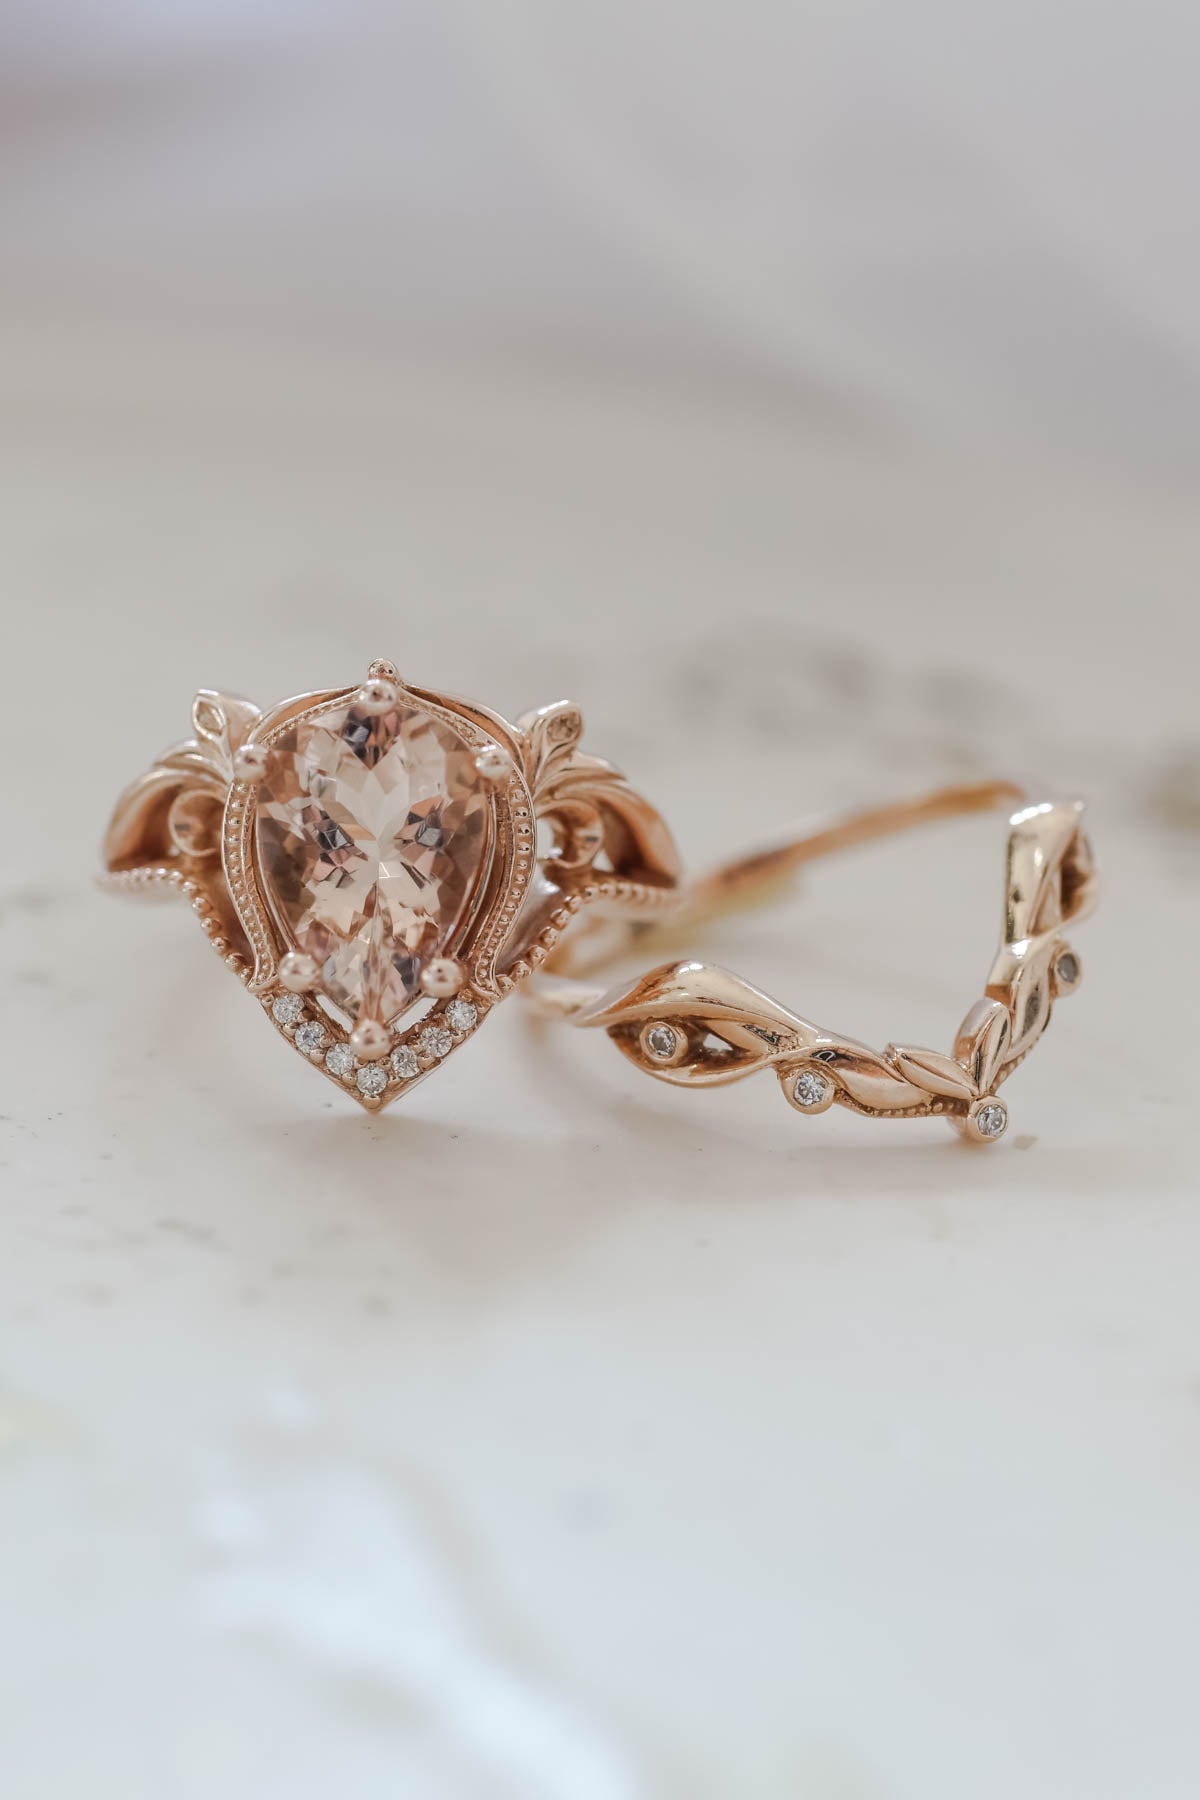 Morganite engagement ring in rose gold, statement ring with peach morganite / Lida - Eden Garden Jewelry™